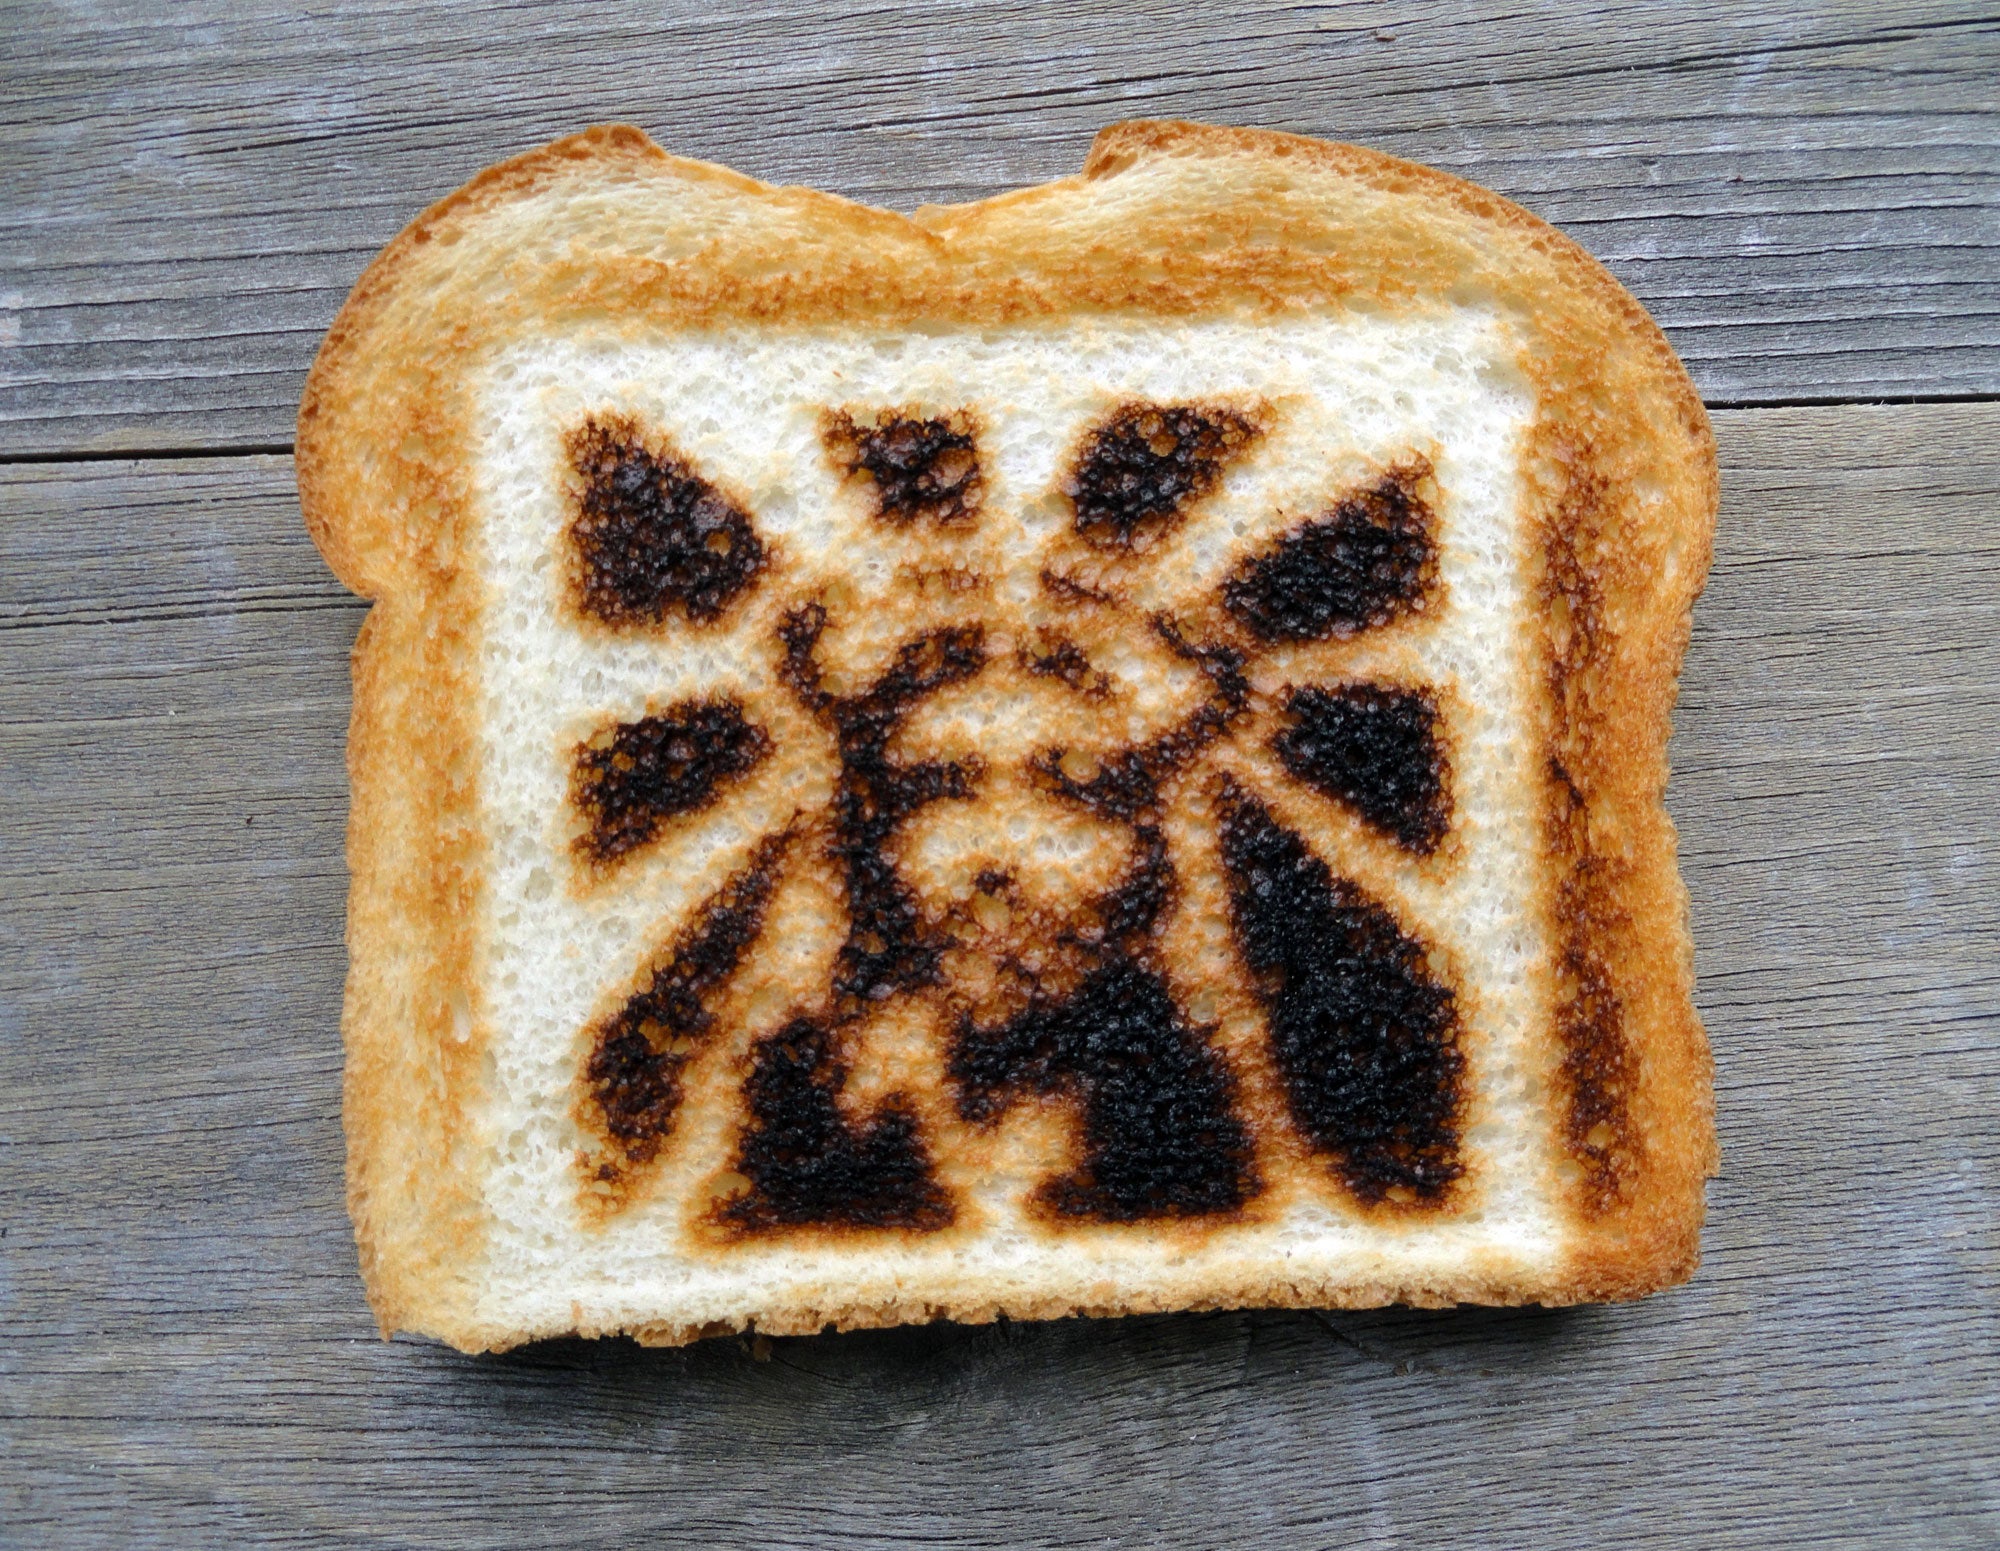 If you squint, you might see an image of Jesus in this slice of toast.